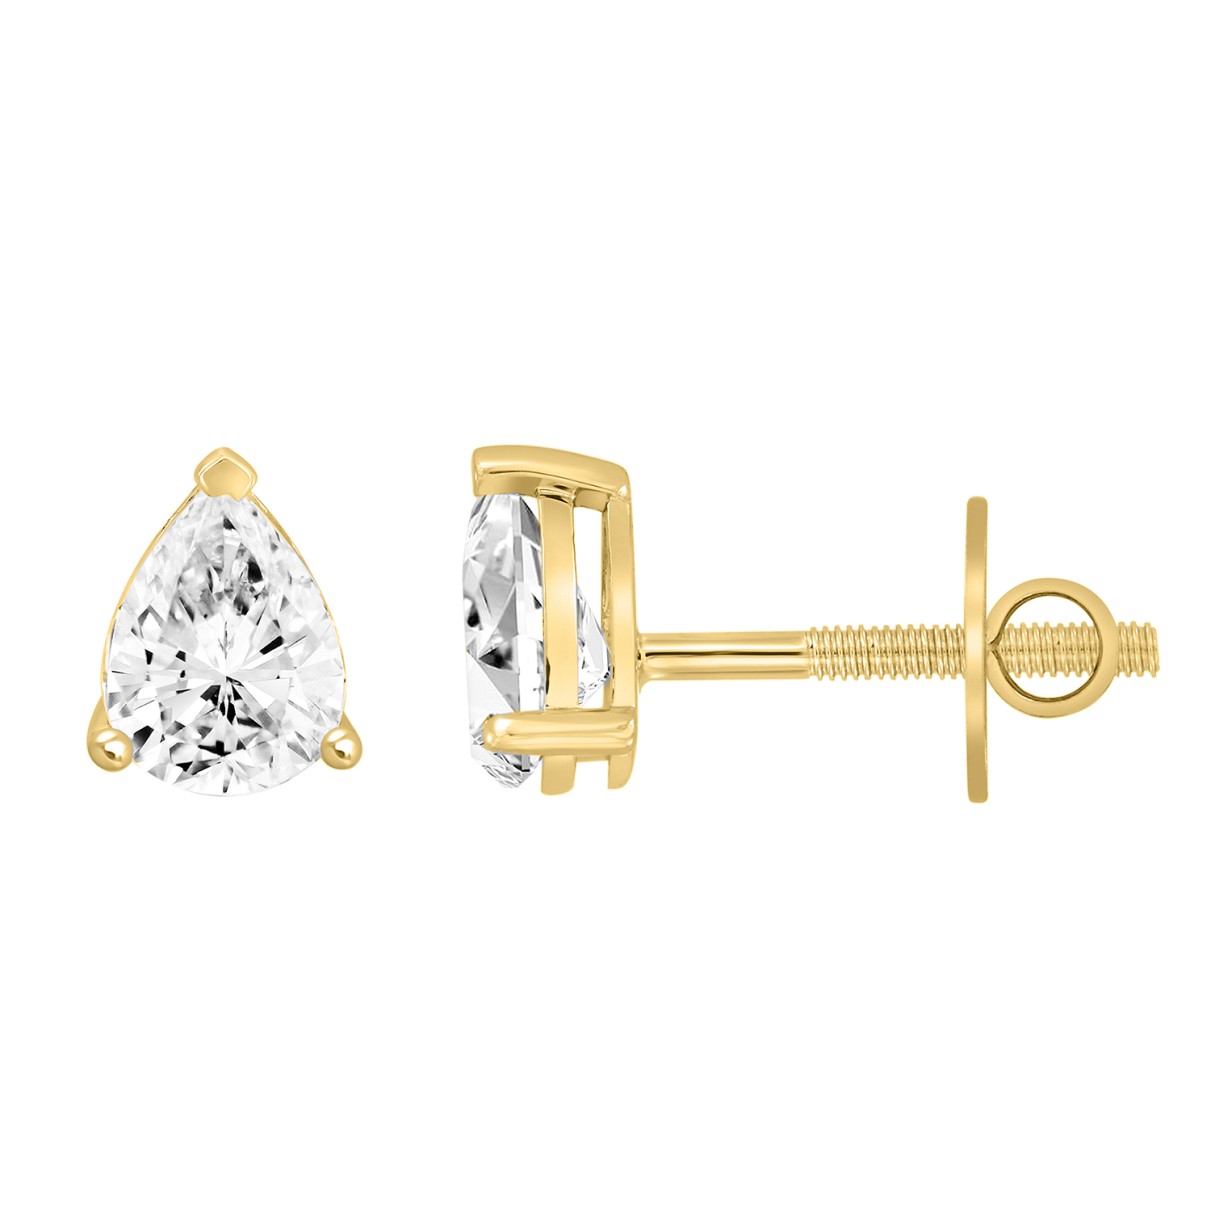 LADIES SOLITAIRE EARRINGS 1CT PEAR DIAMOND 14K YELLOW GOLD